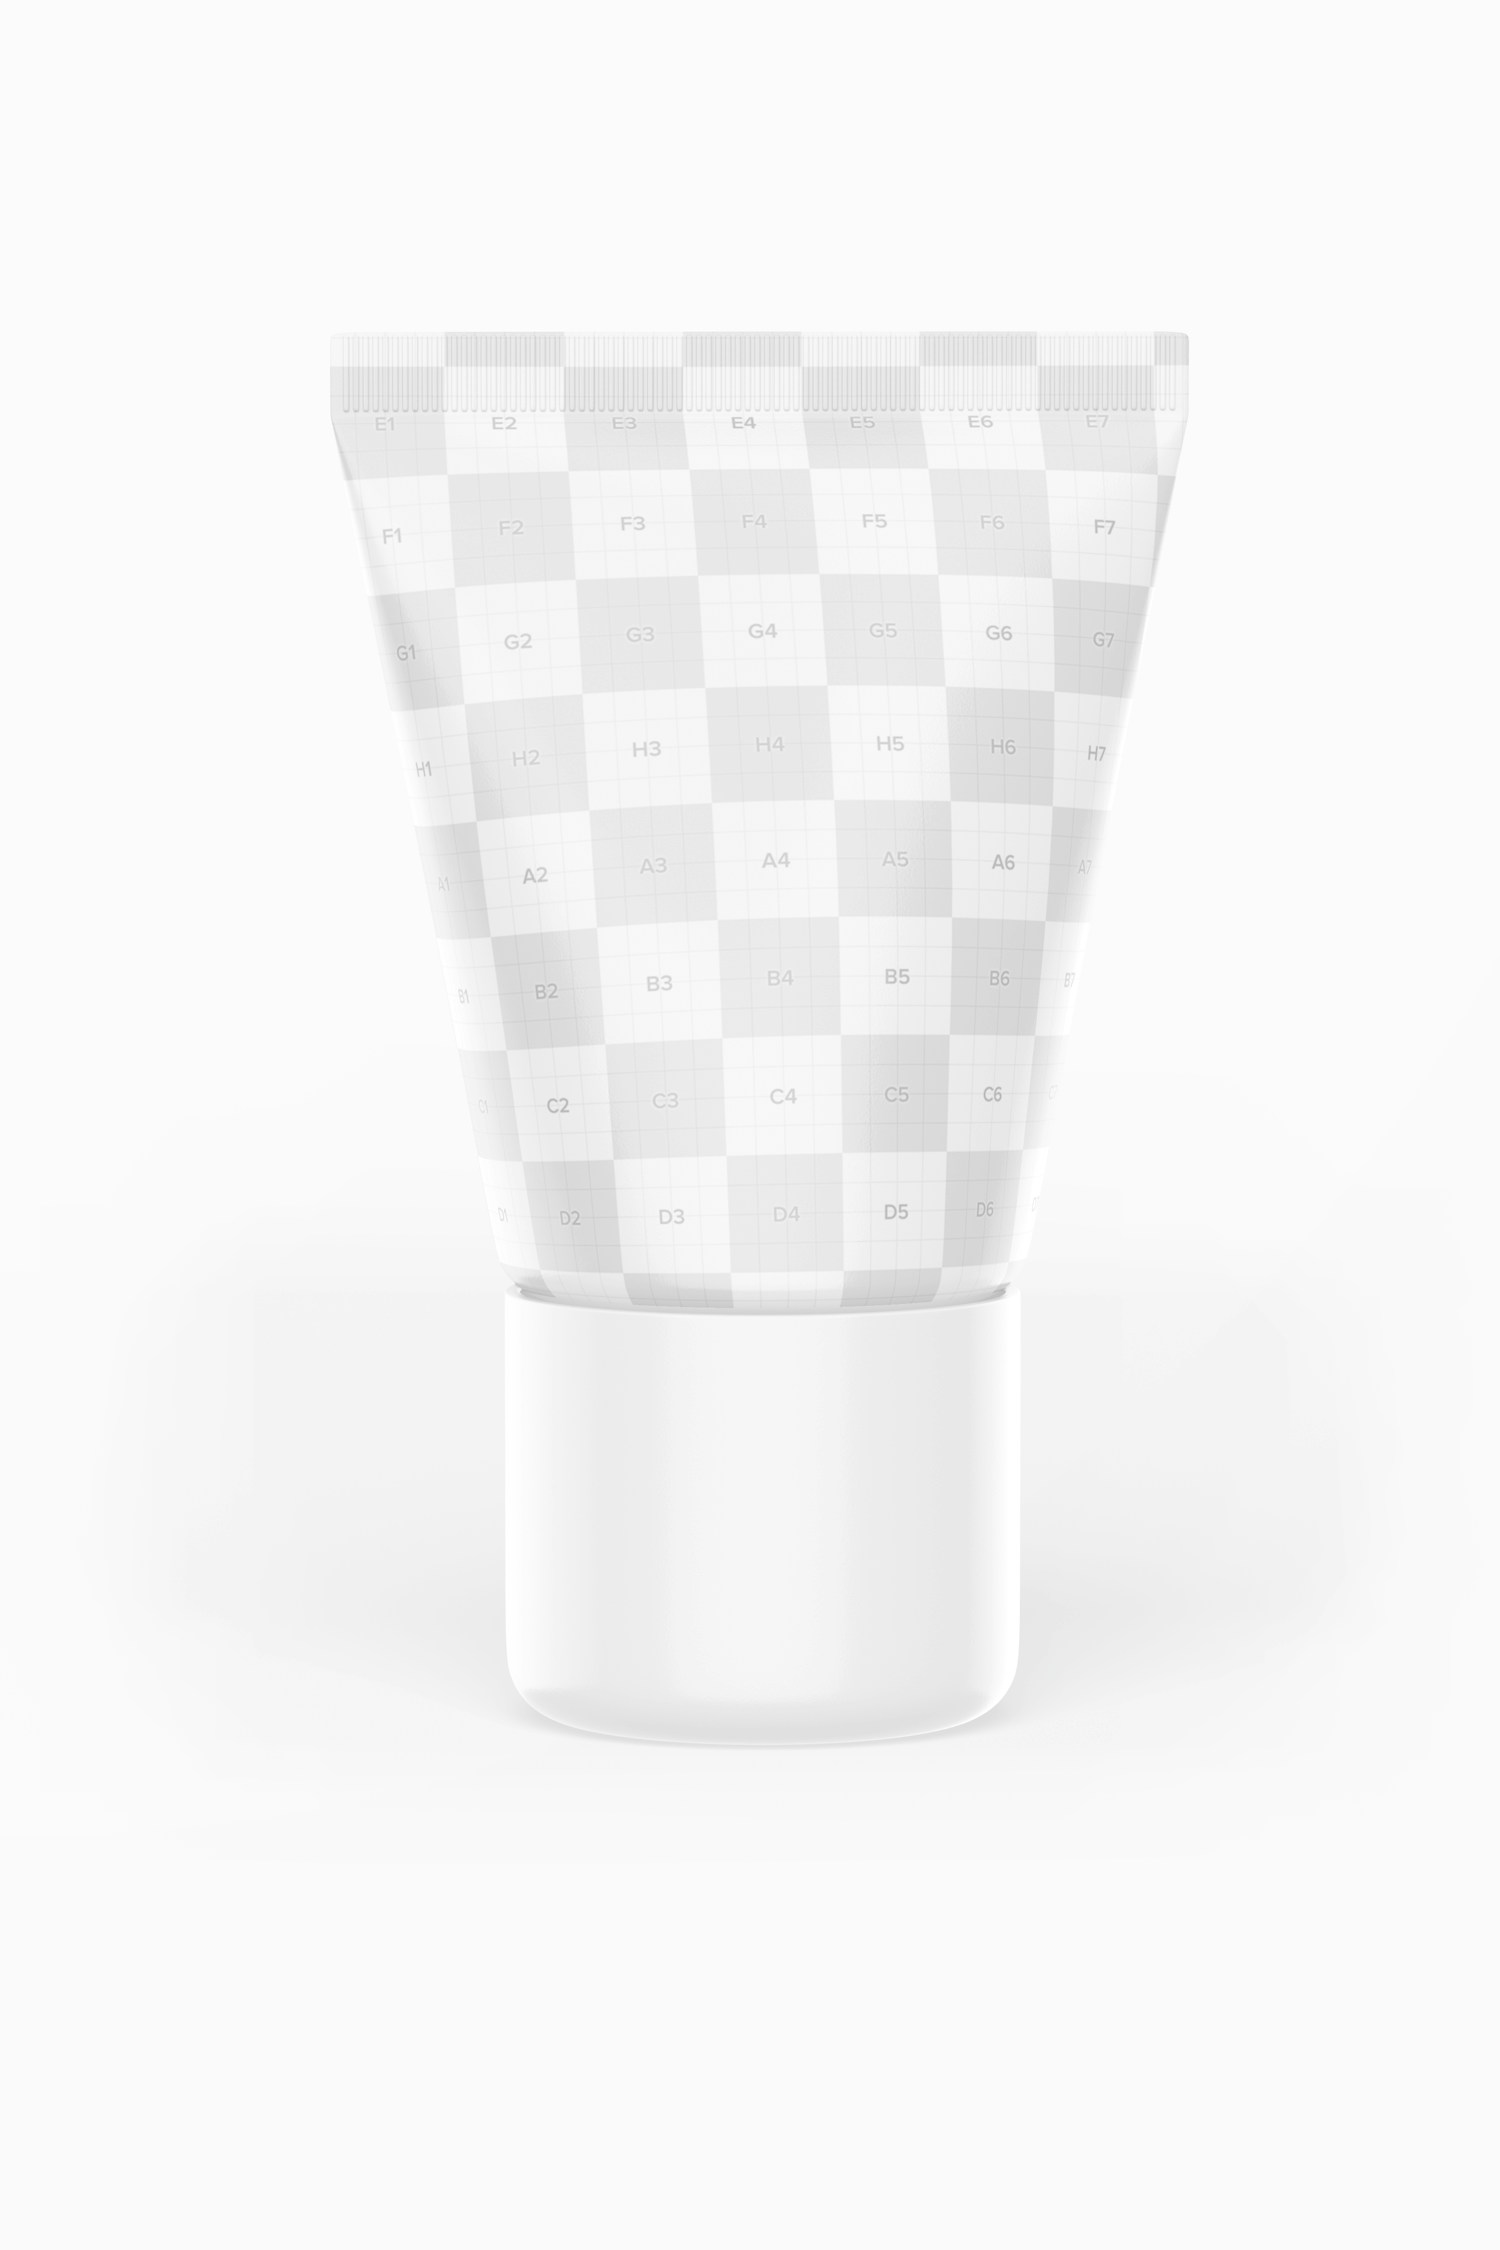 1.23 Oz Candy Tube Mockup, Front View